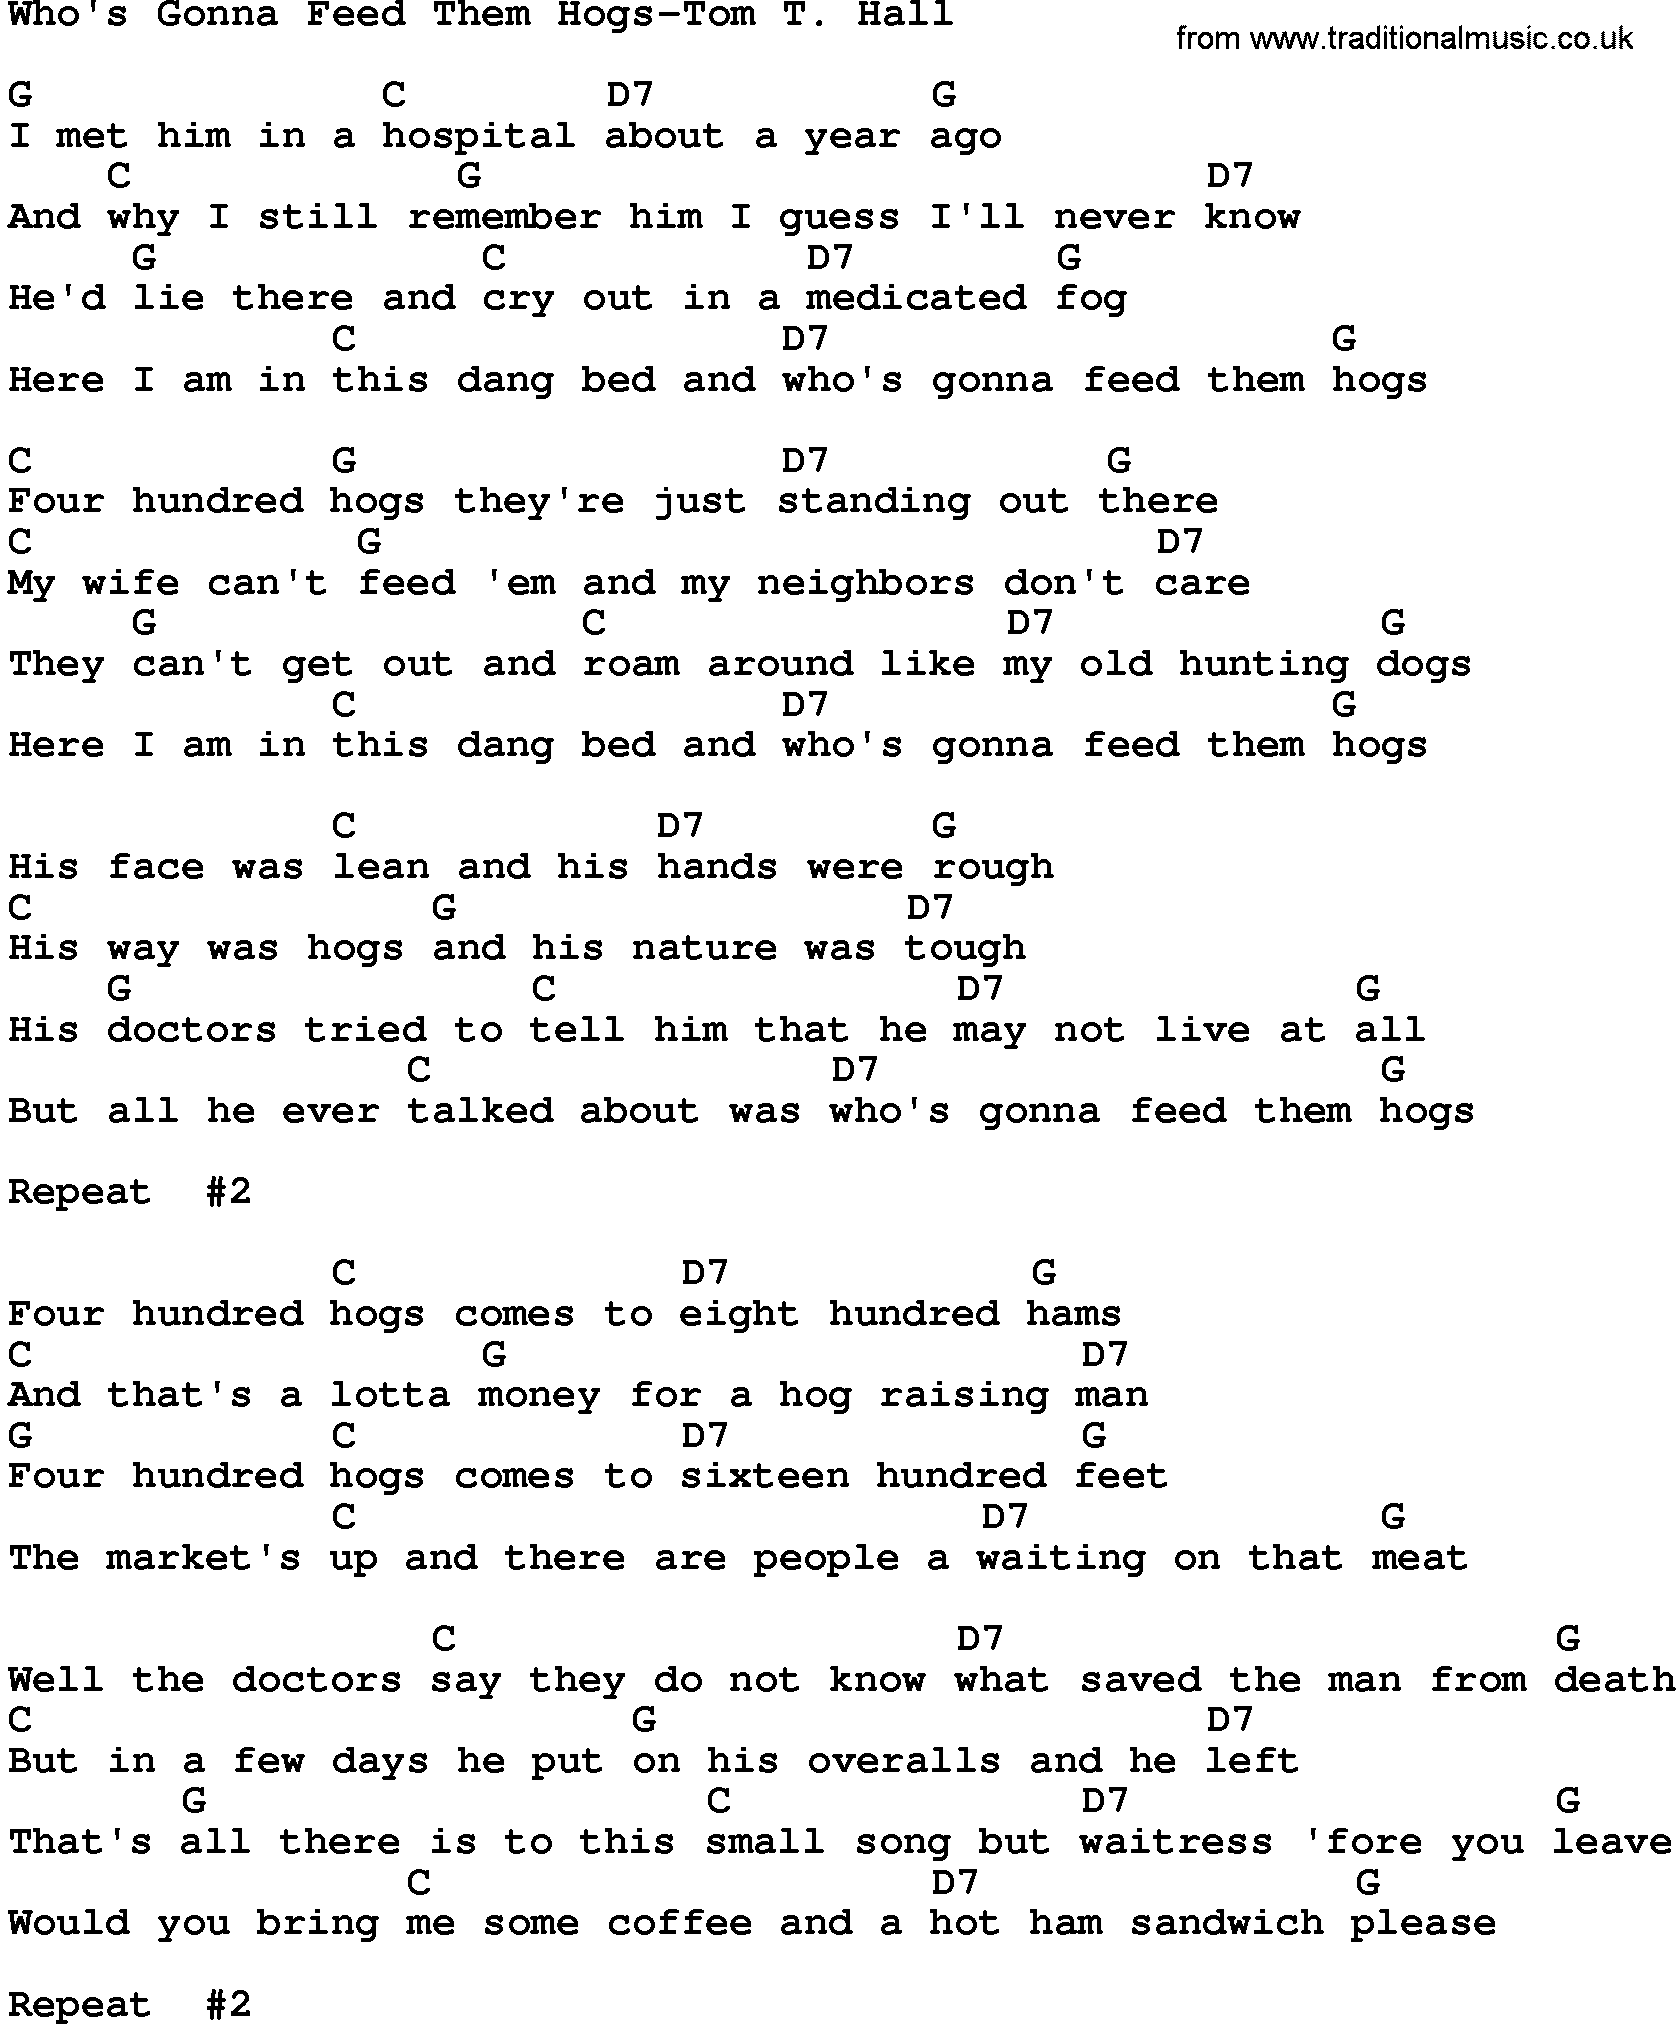 Country music song: Who's Gonna Feed Them Hogs-Tom T Hall lyrics and chords